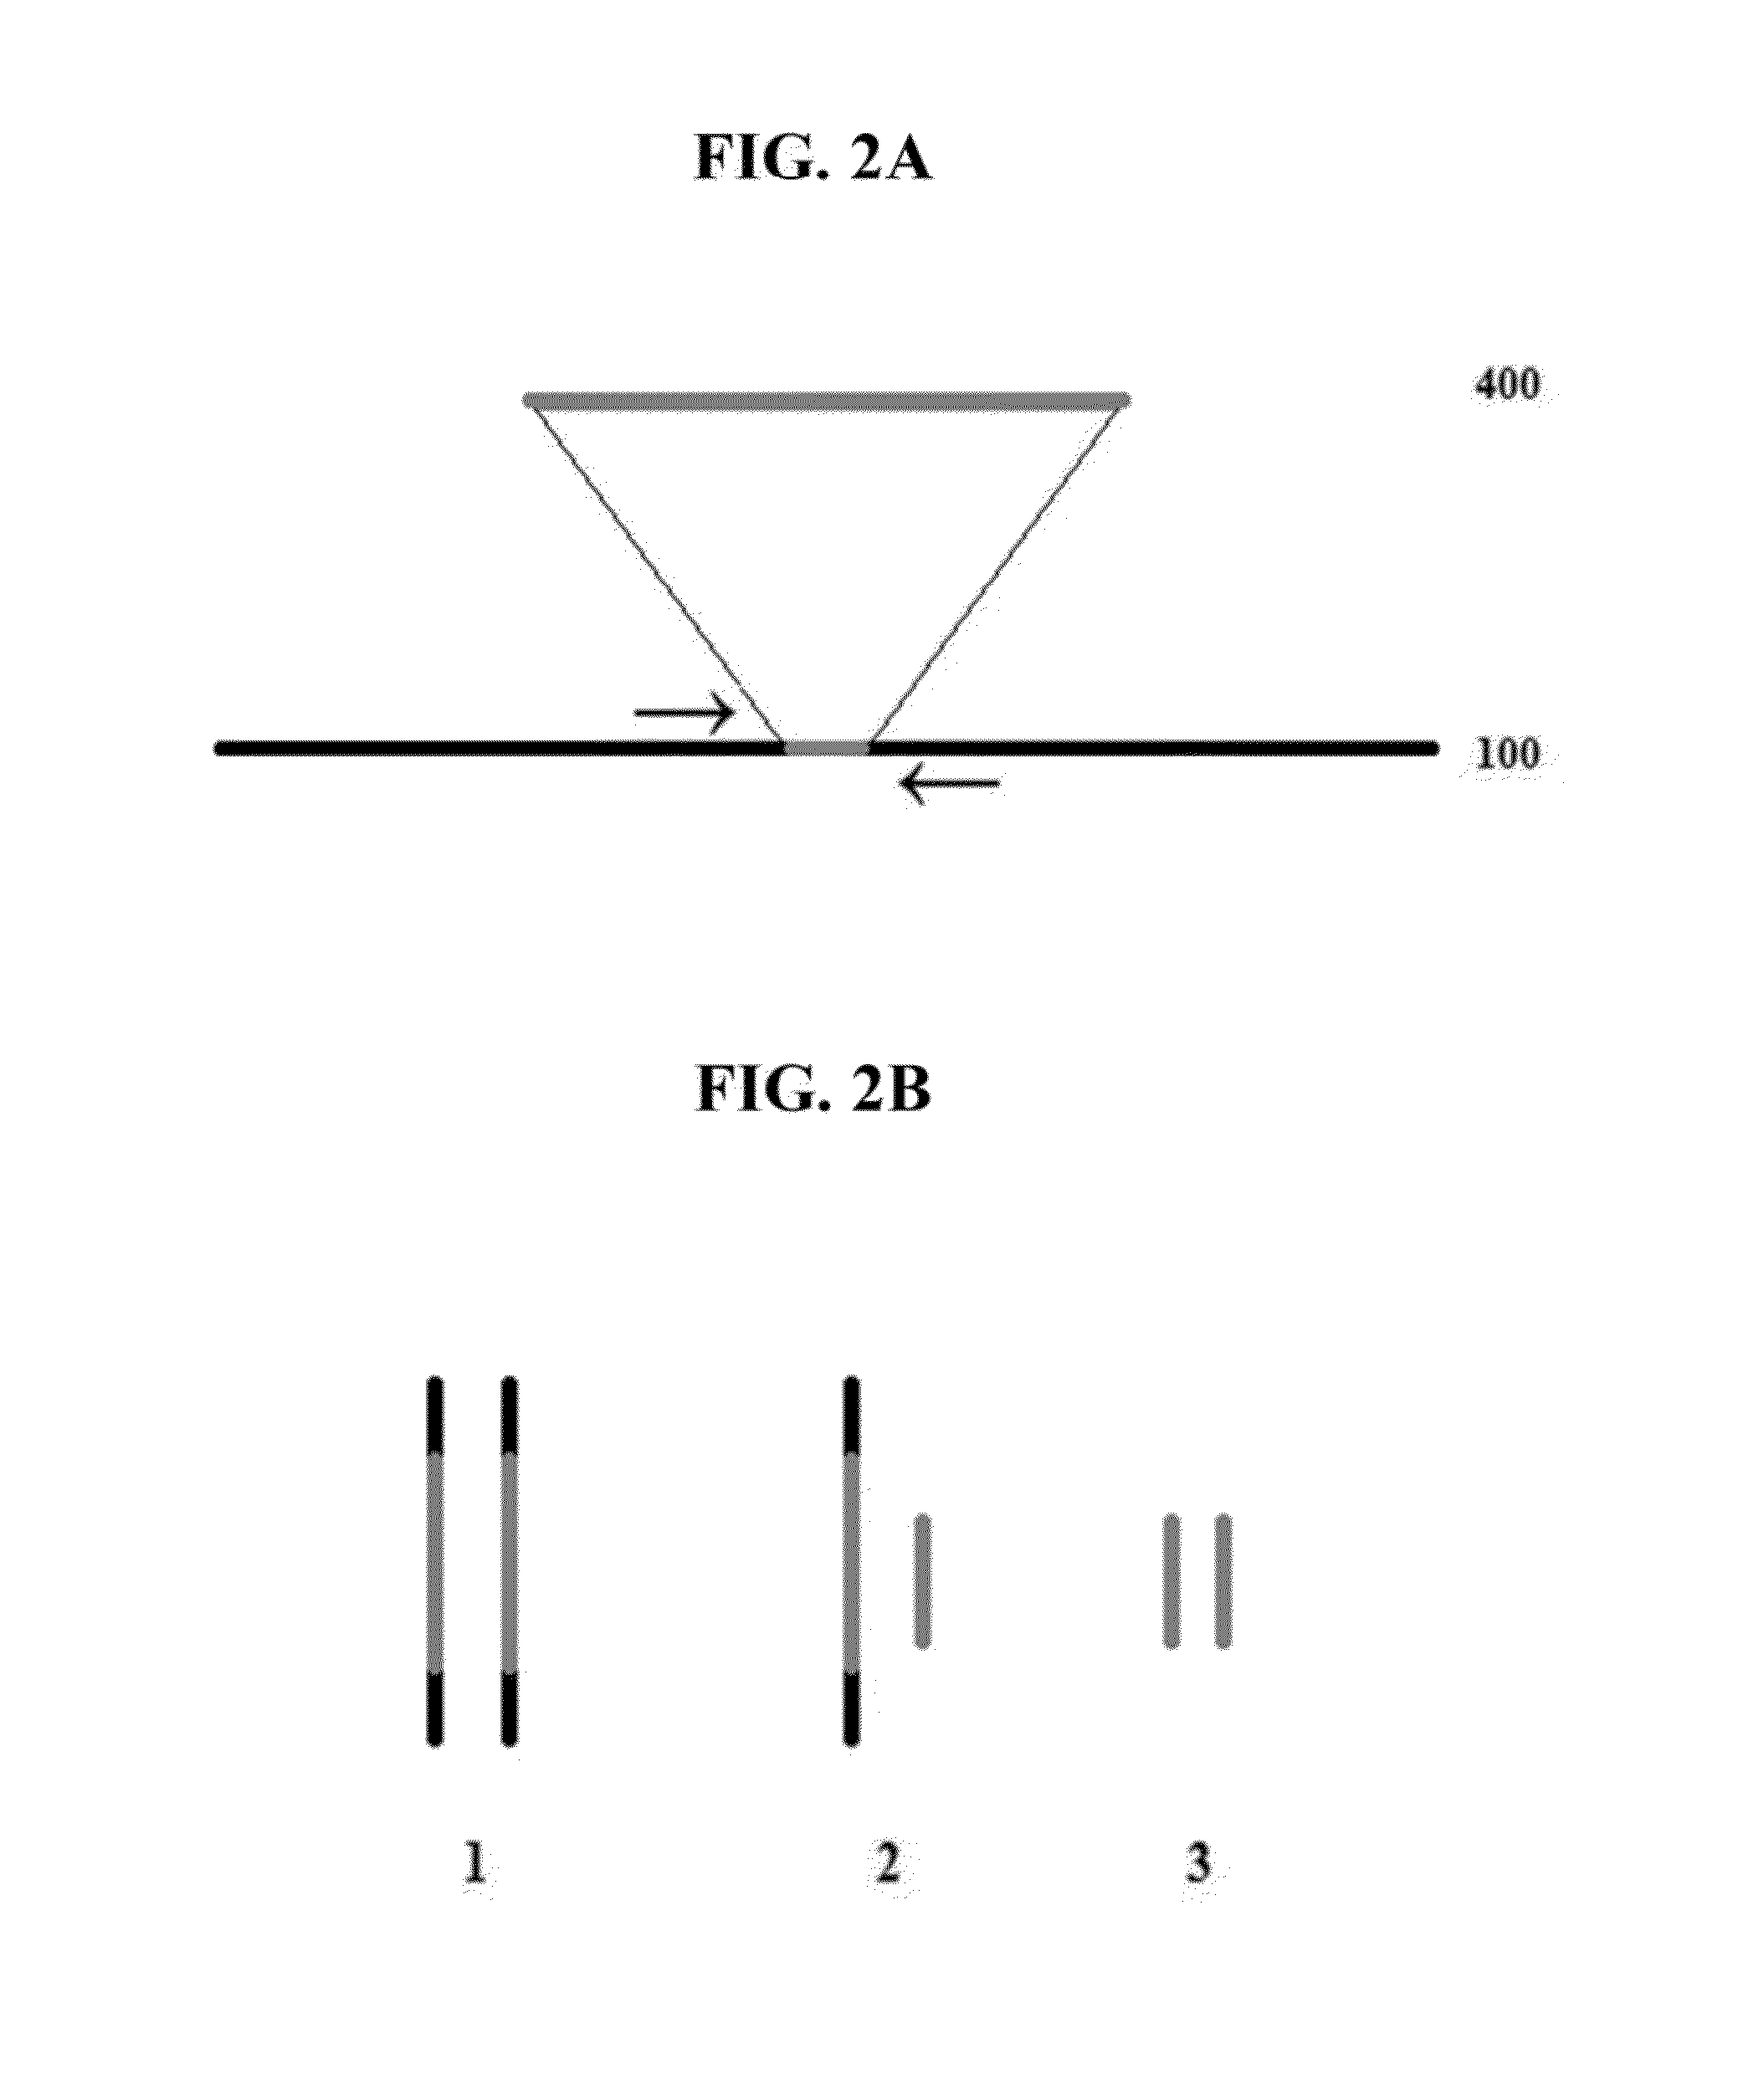 Method for genetic detection using interspersed genetic elements:  a multiplexed DNA analysis system